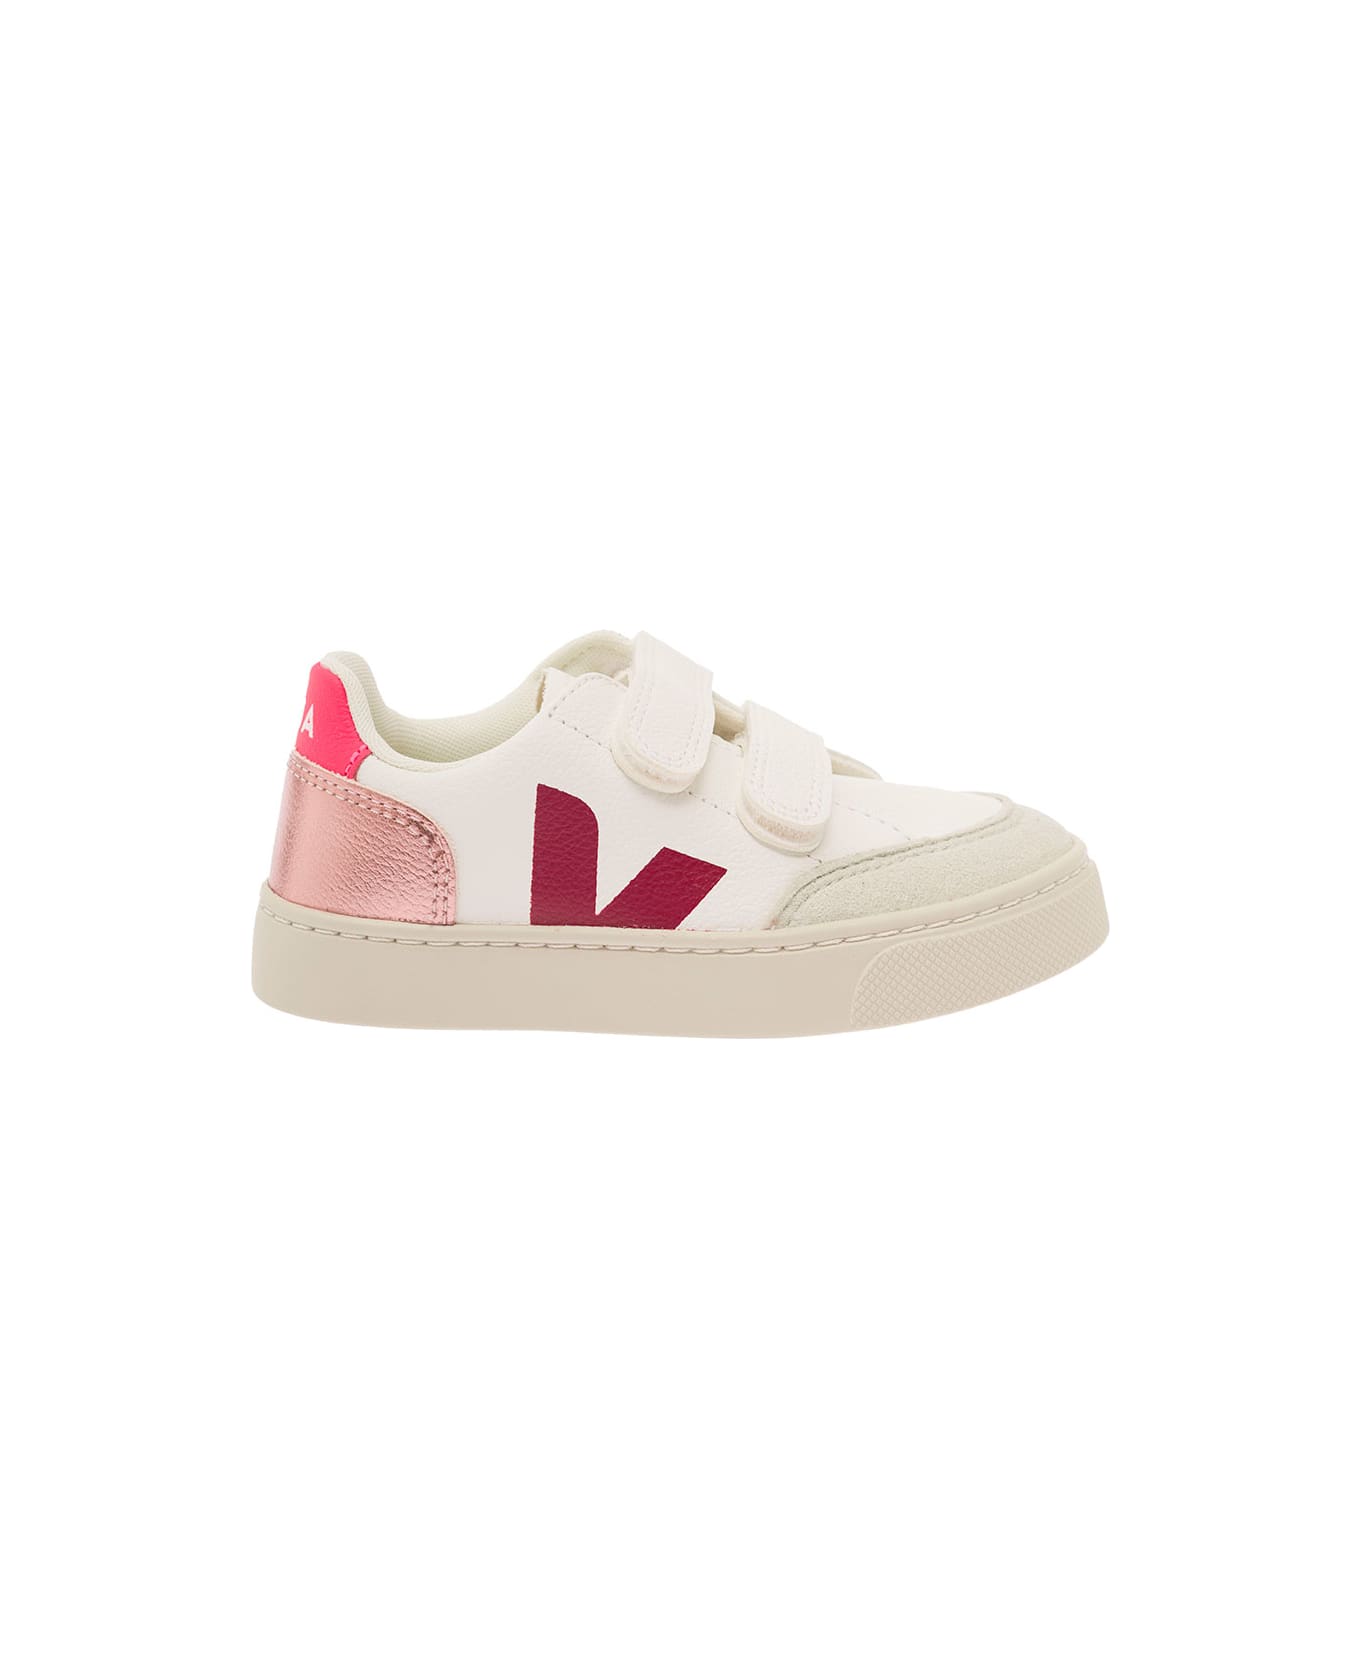 Veja White Sneaker With Fuchsia Logo And Heel Tab In Leather Girl - Multicolor シューズ